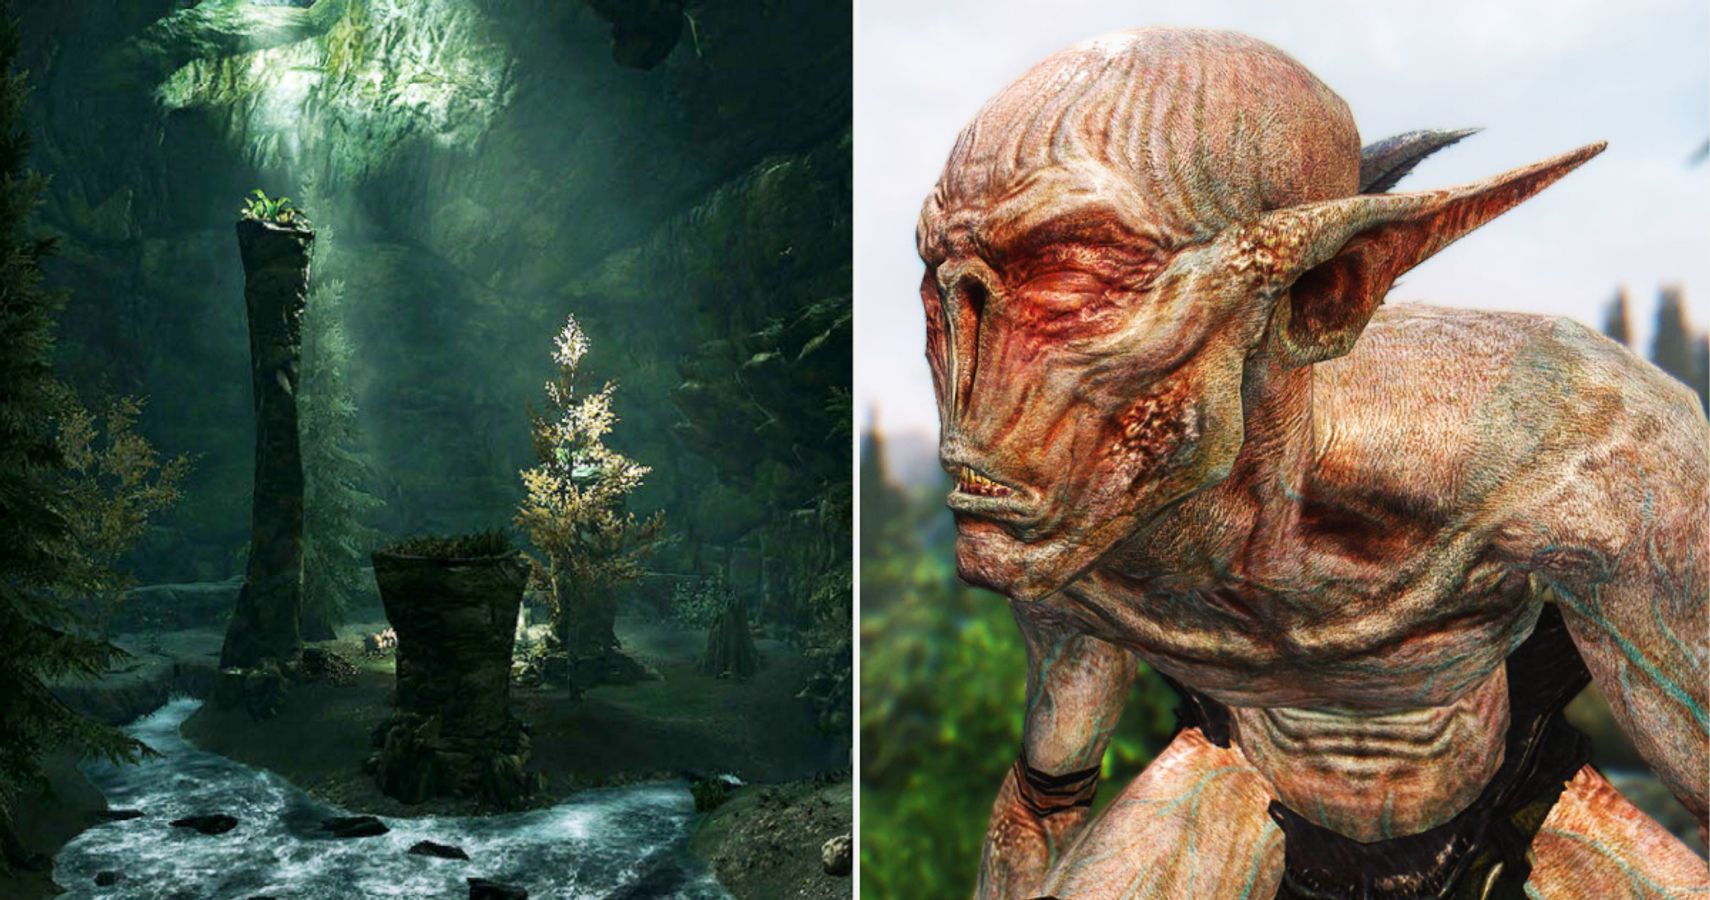 the best mods for skyrim